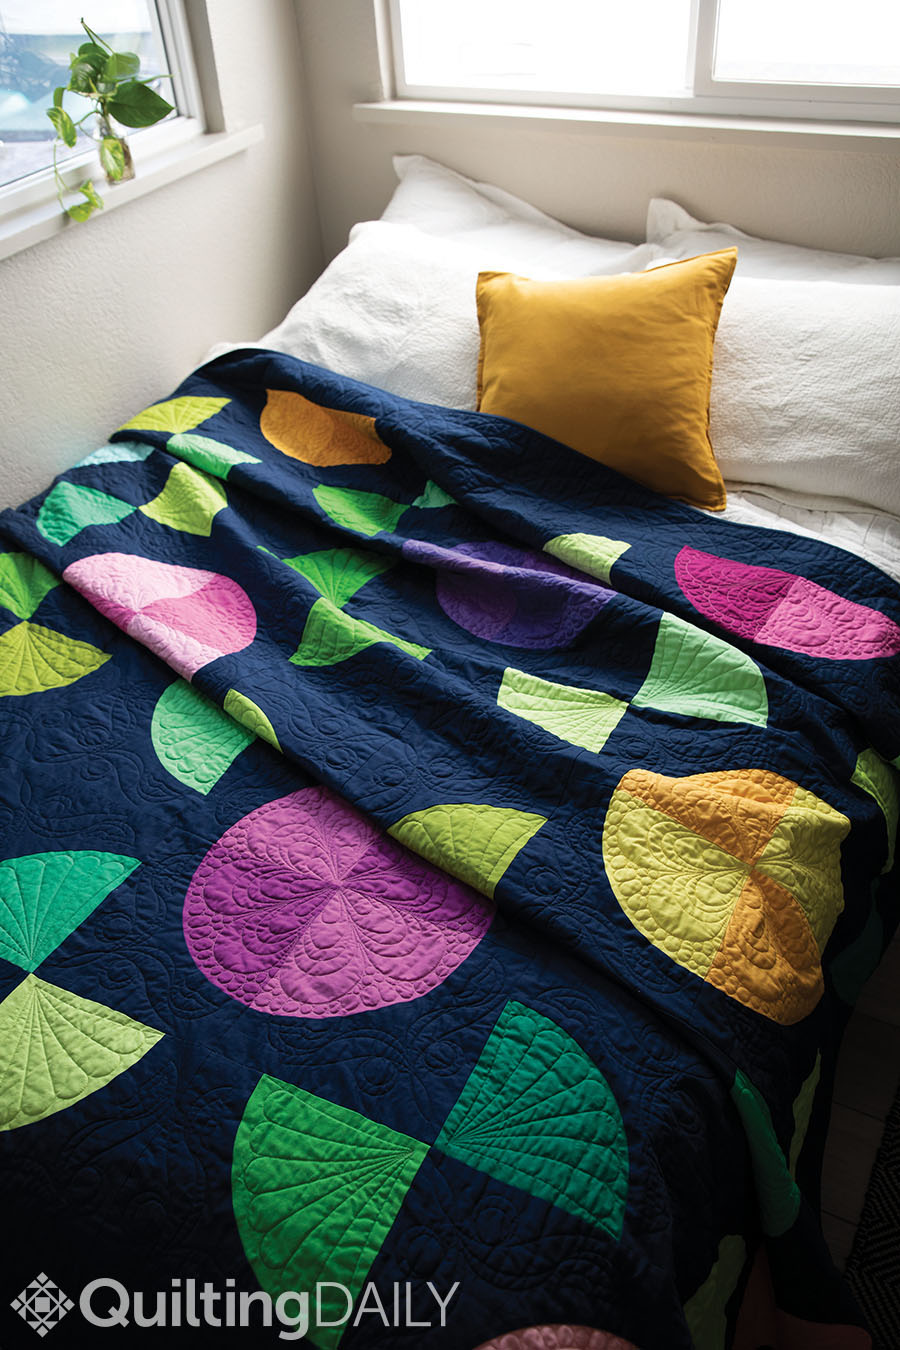 Free quilt pattern: Drunken Flowers - quilt displayed as a comforter on a bed